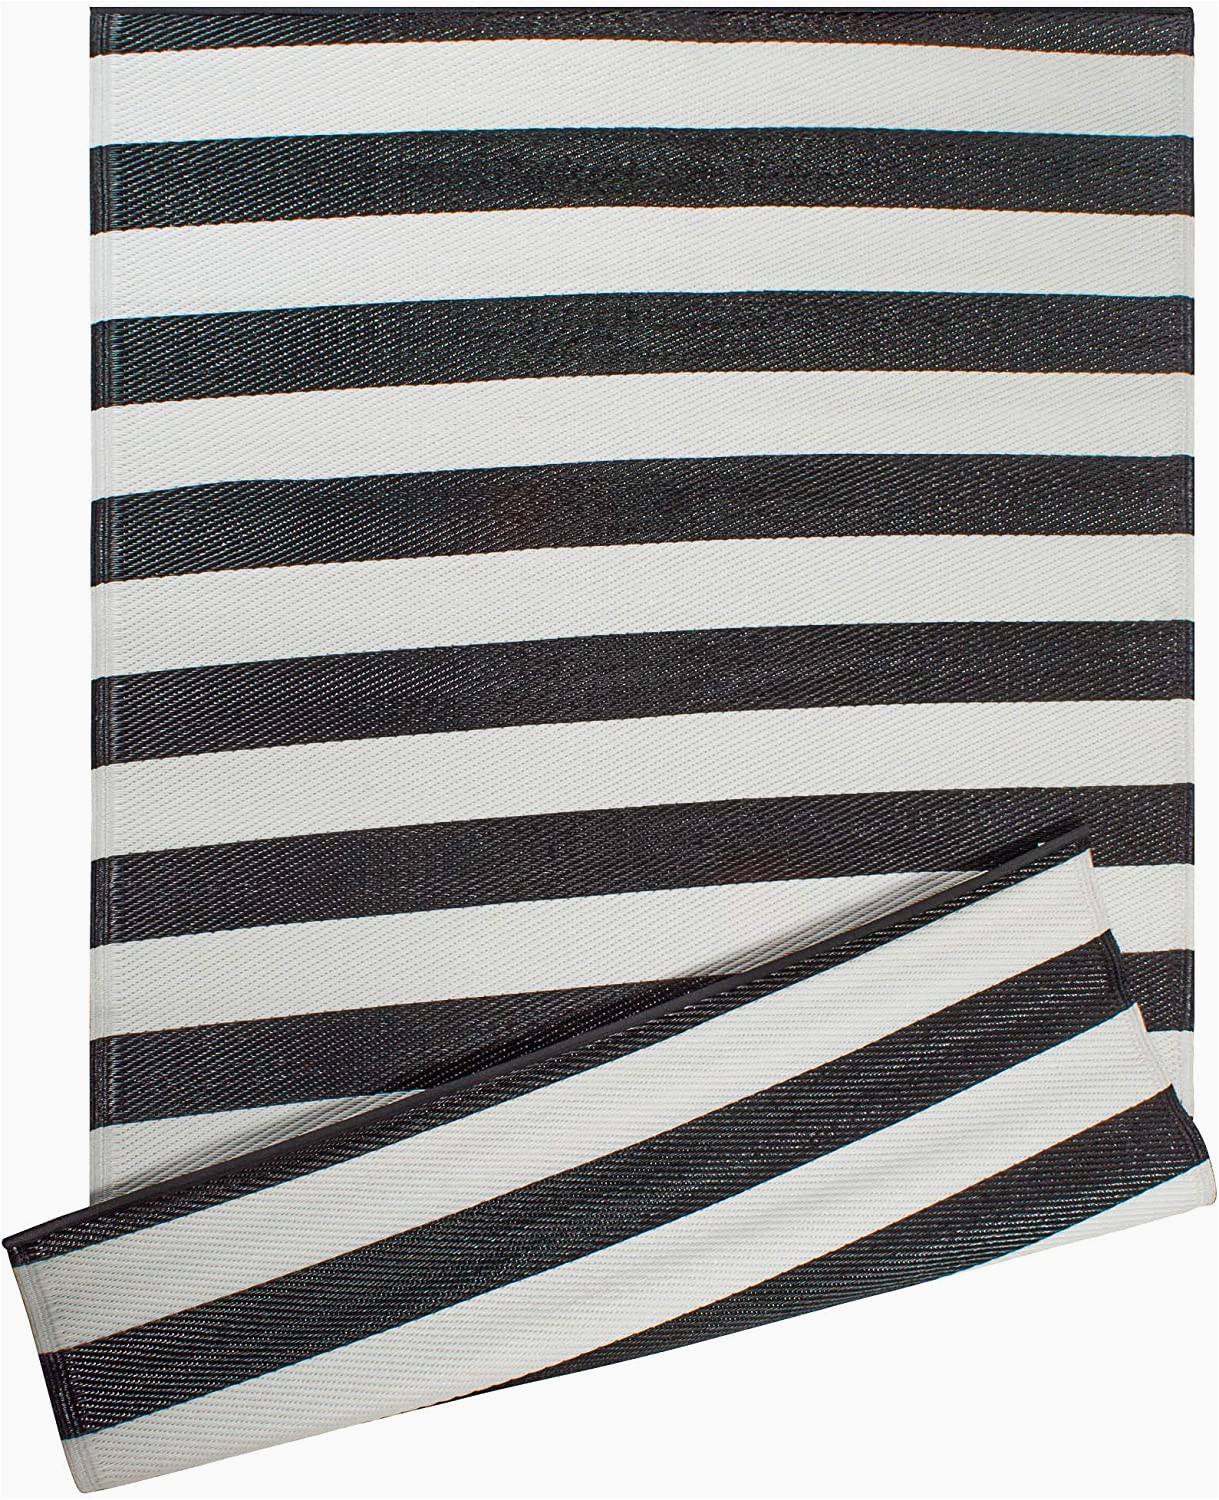 Black and White Woven area Rug Dii Reversible Indoor Woven Striped Outdoor Rug 4×6 White & Black